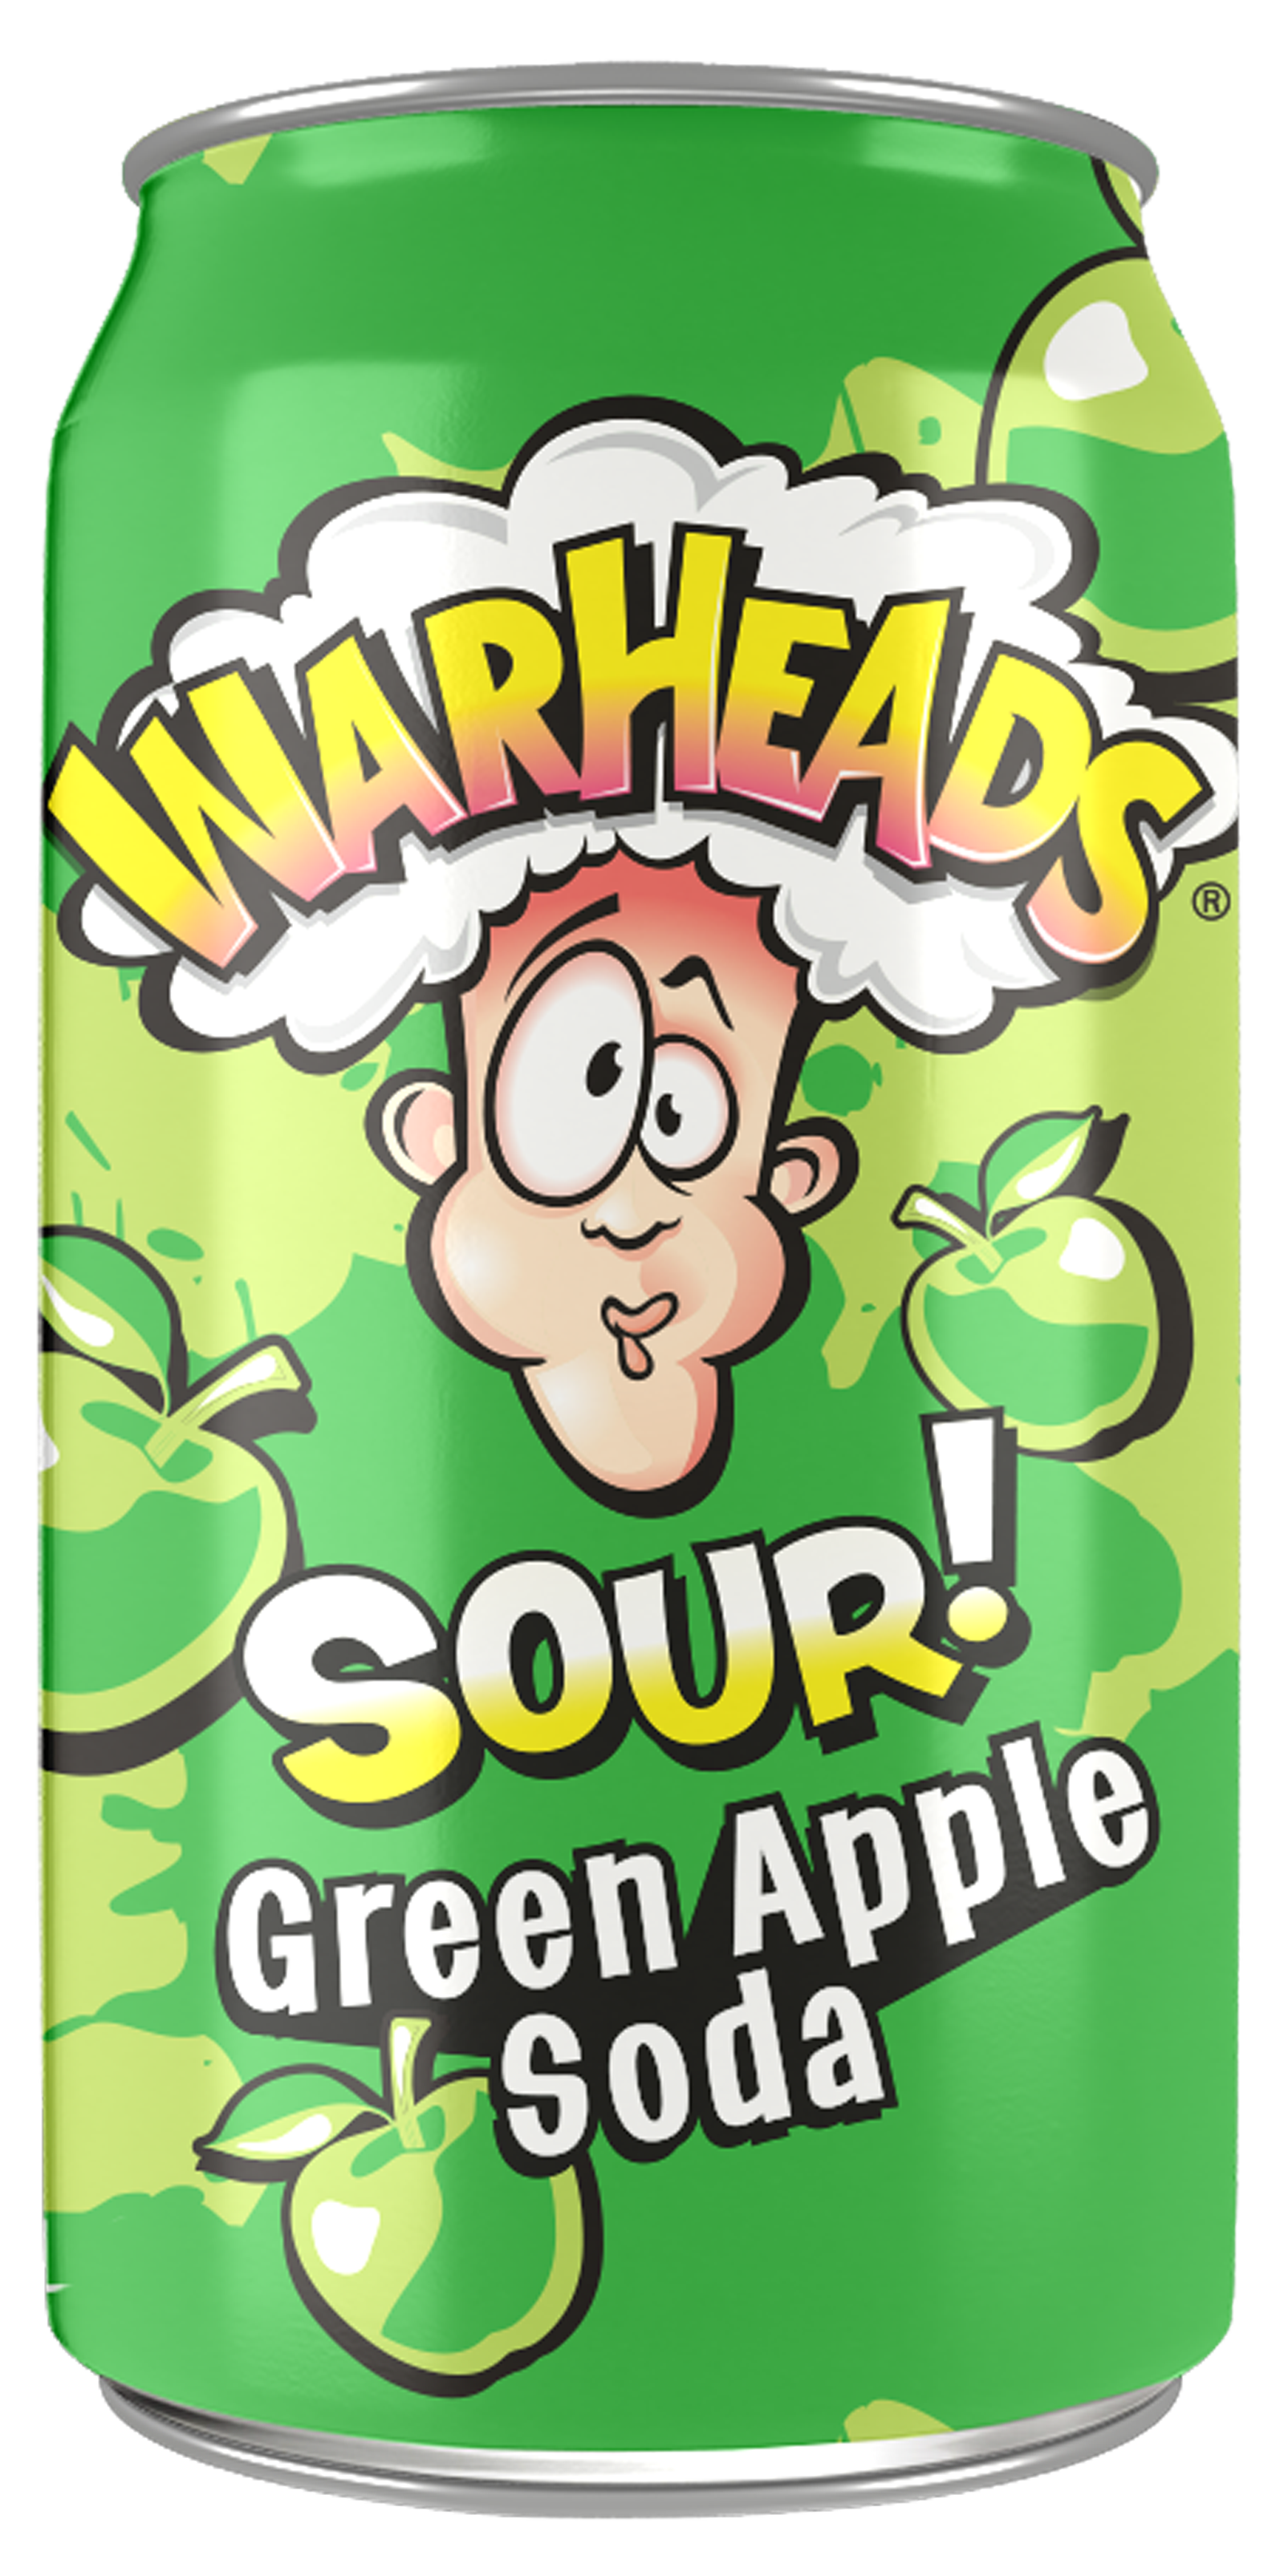 Warheads Sour Soda officially lands in the UK